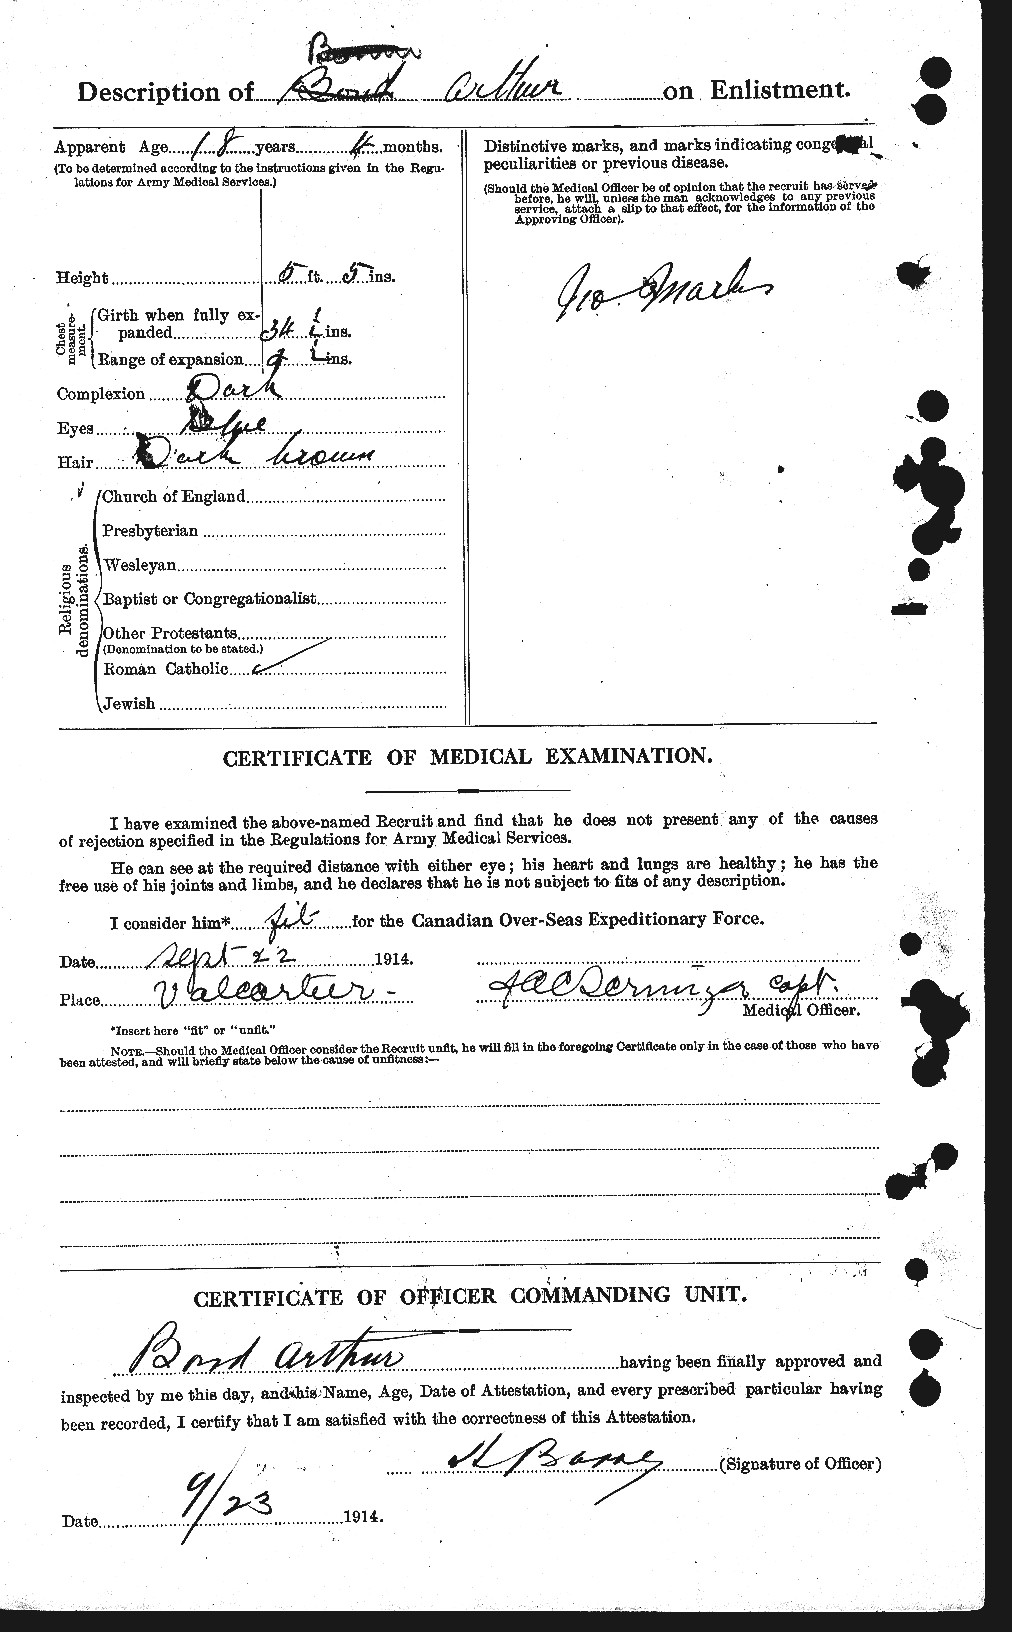 Personnel Records of the First World War - CEF 250253b